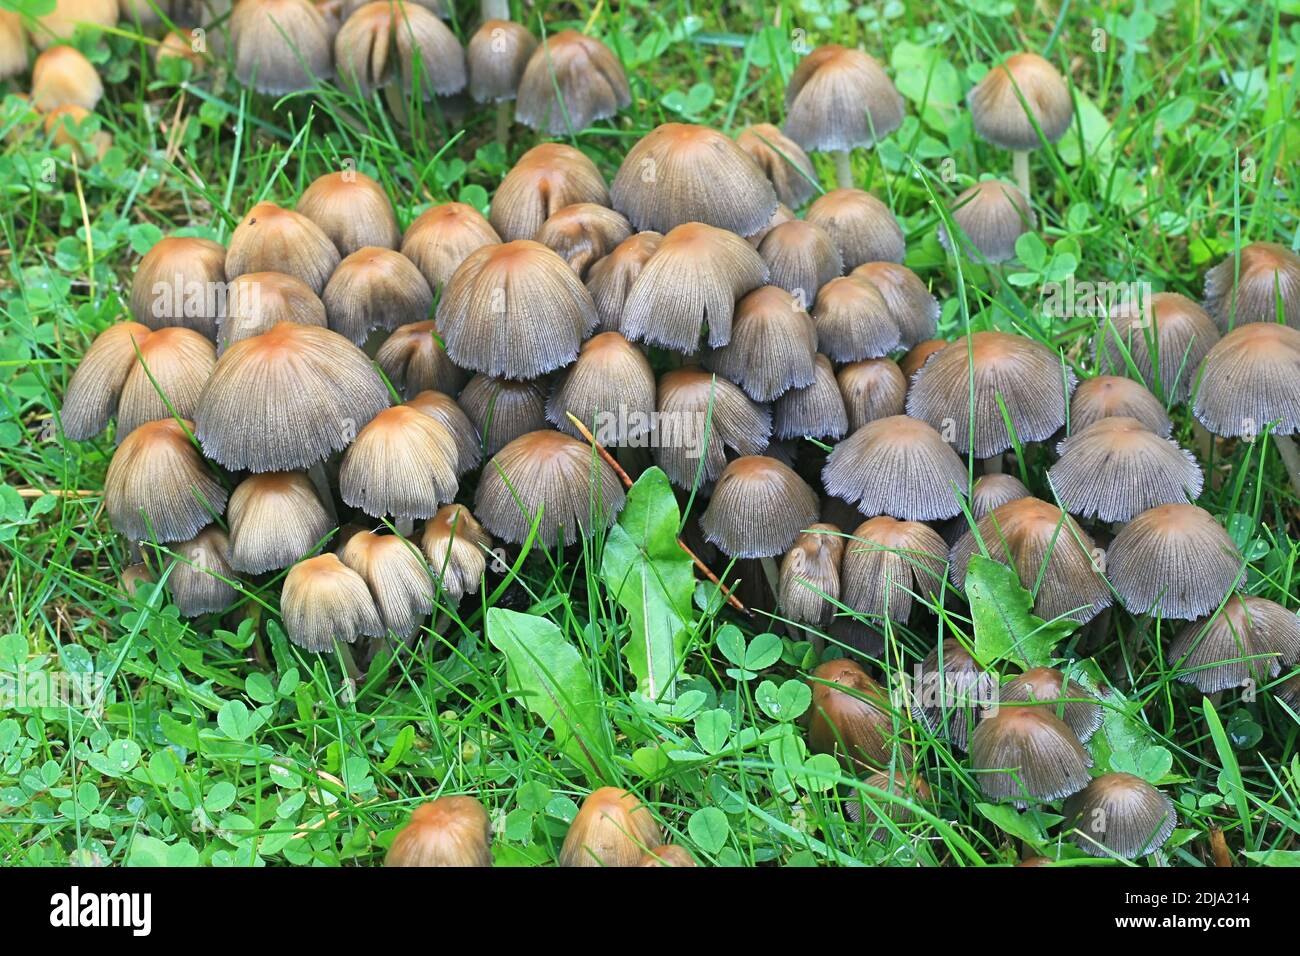 Coprinellus micaceus, also called Coprinus micaceus, commonly known as Glistering Inkcap, wild mushroom from Finland Stock Photo